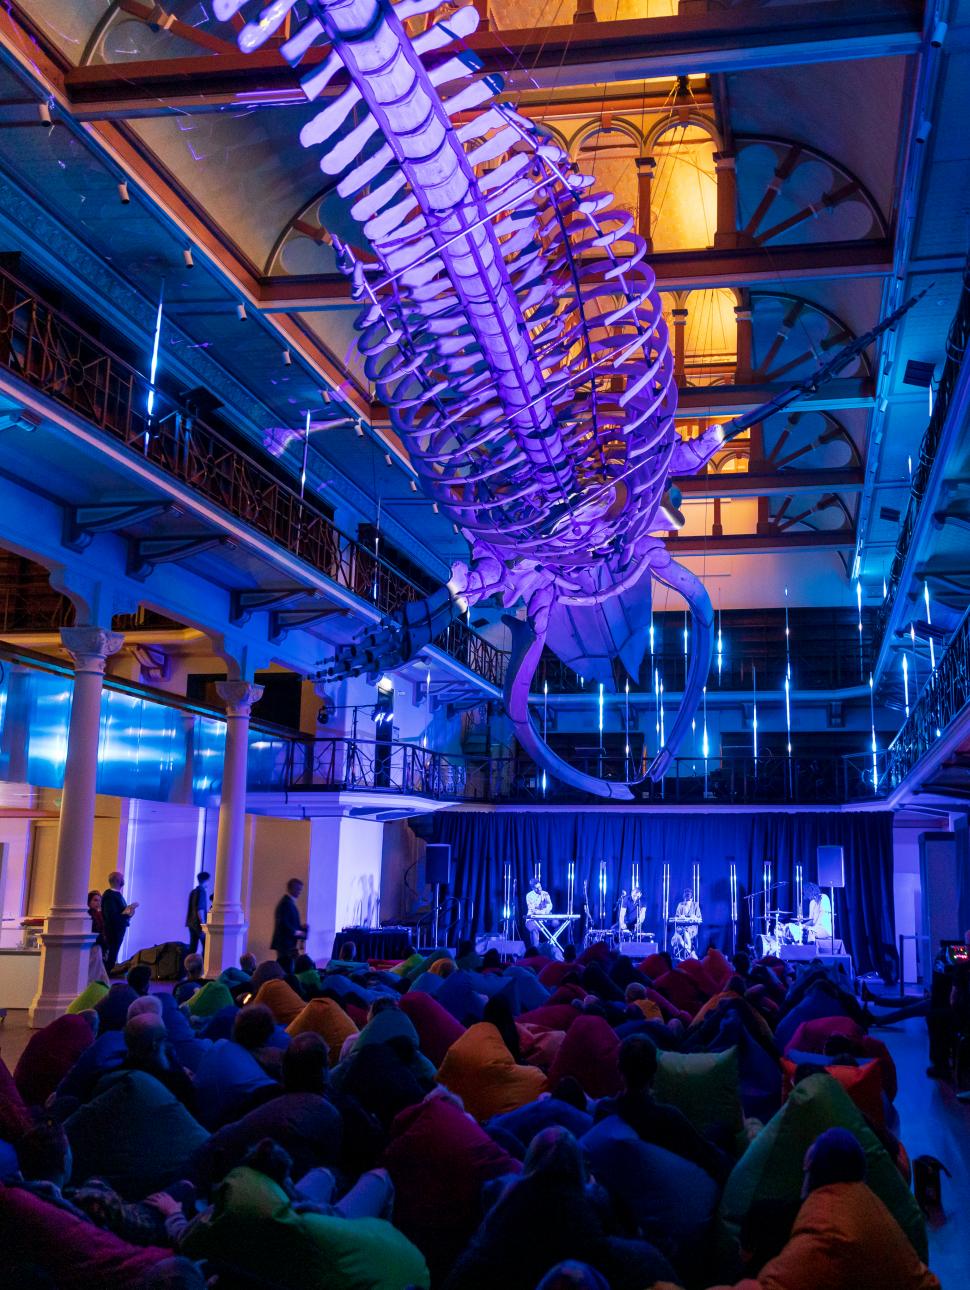 Image of coloured lights projected onto Otto the whale skeleton with audience seated underneath and musician performing onstage